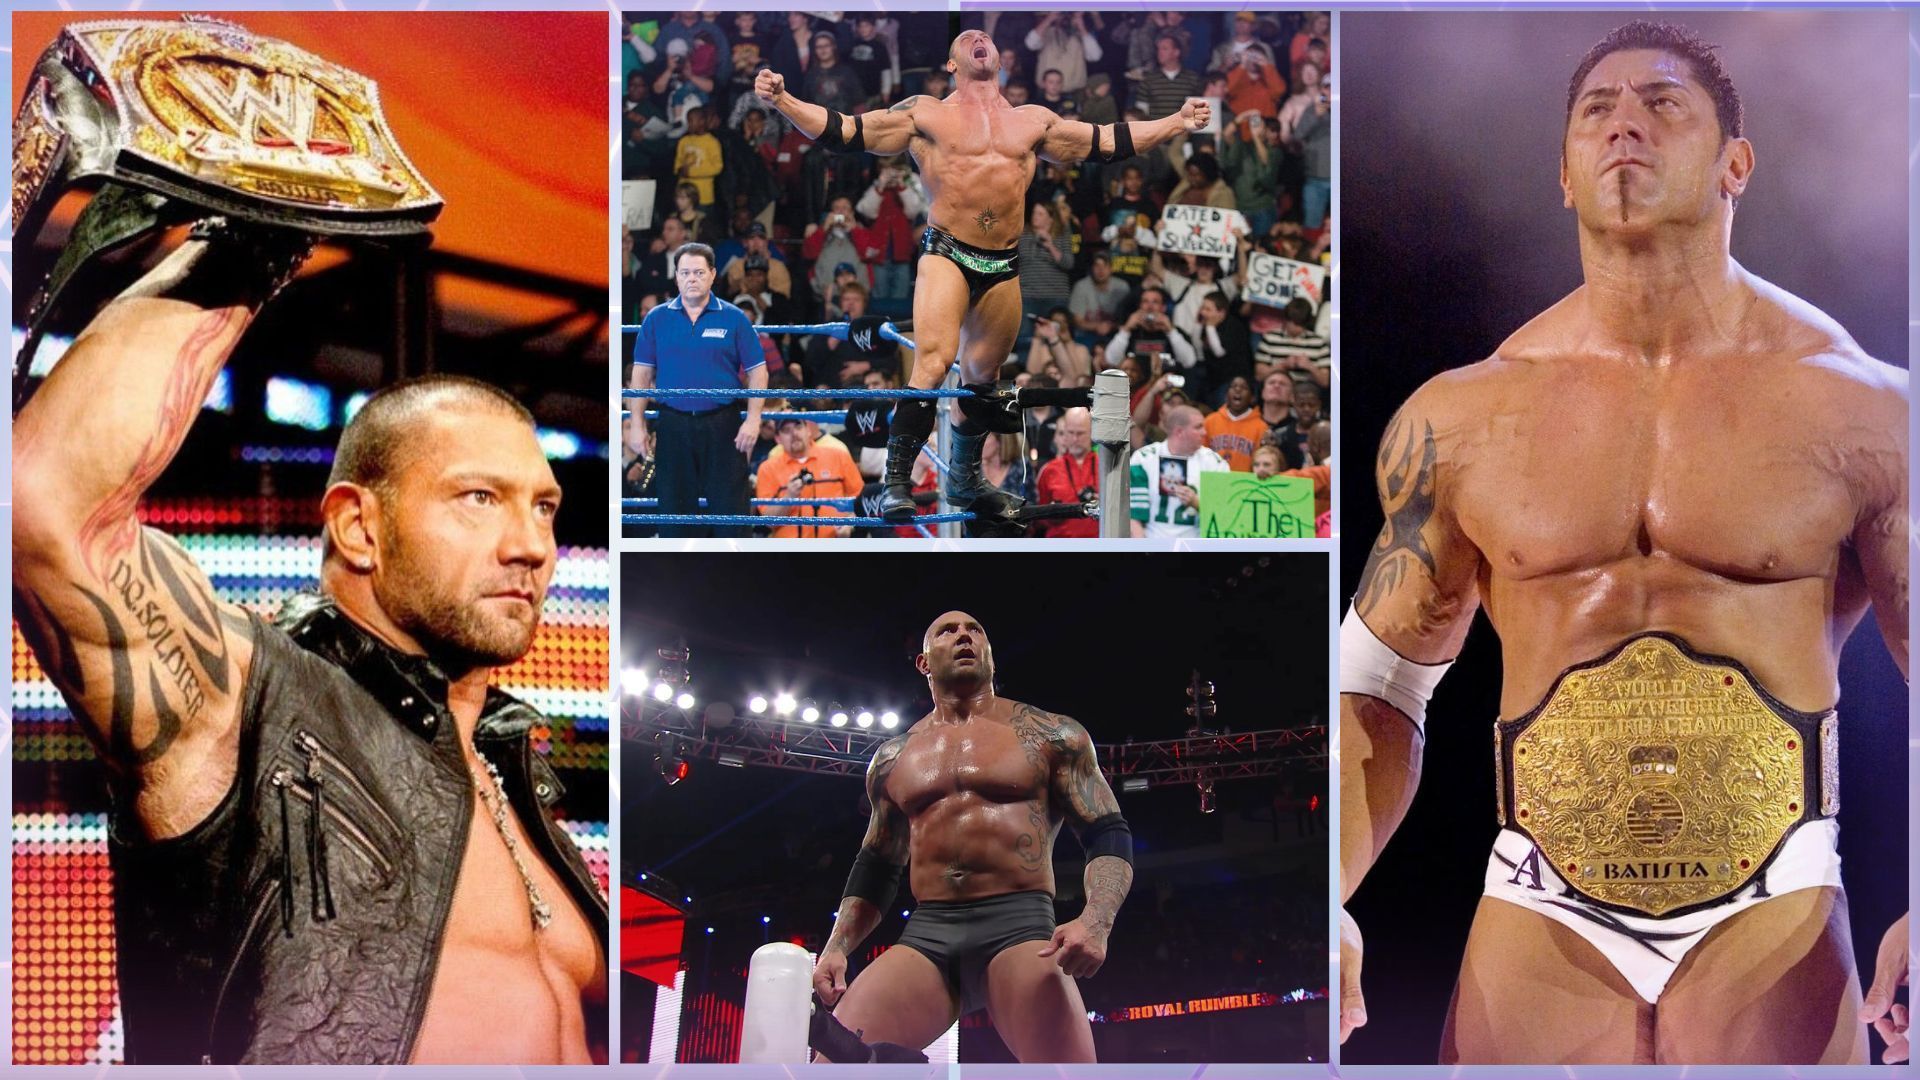 Batista is a former WWE Champion.